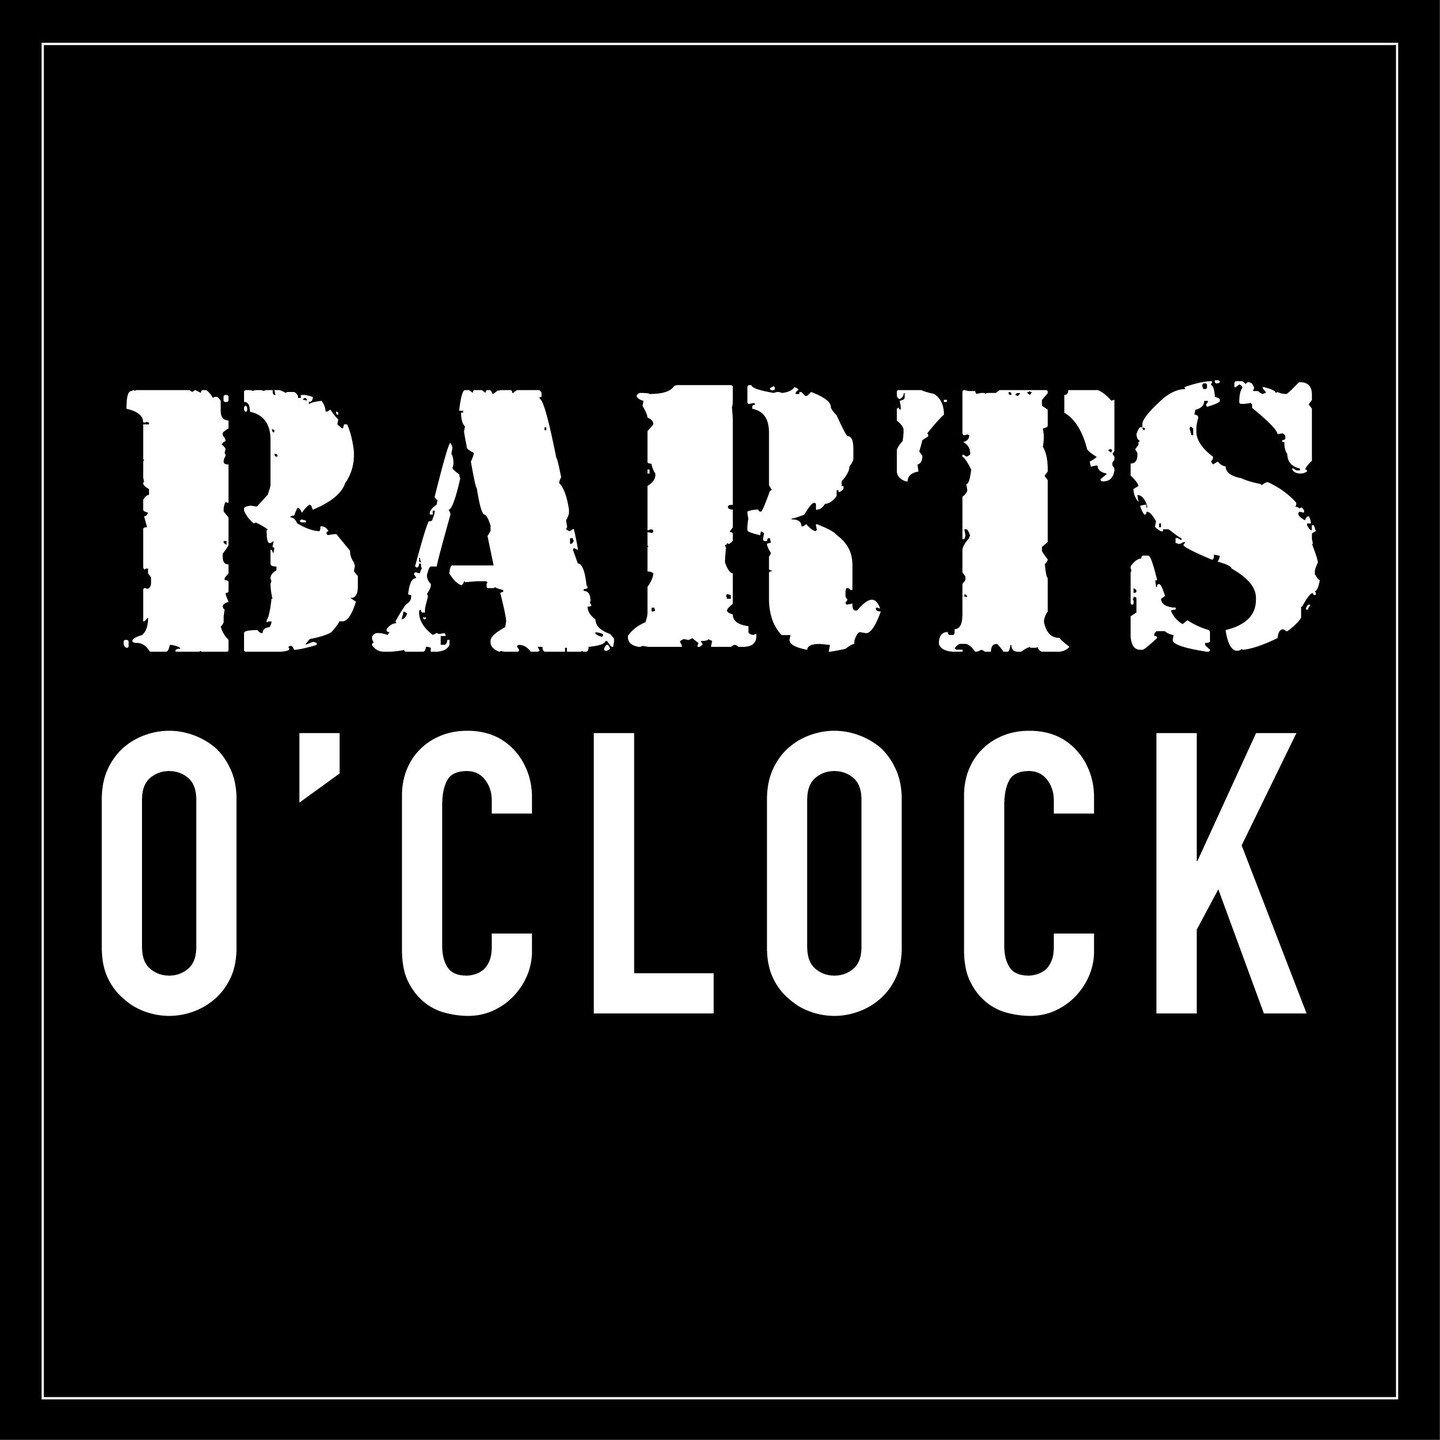 ⏰ It's that time - Barts o'clock! Time for a Ice cold Barts Bloody Mary. Cheers, y'all! #bartsbloodymary #betterbebarts #shopsmall #drinklocal #shoplocal #buylocal #shopsmallmidland #midlandtx #midlandia #westtexas #madeintexas #madeintejas #supportl